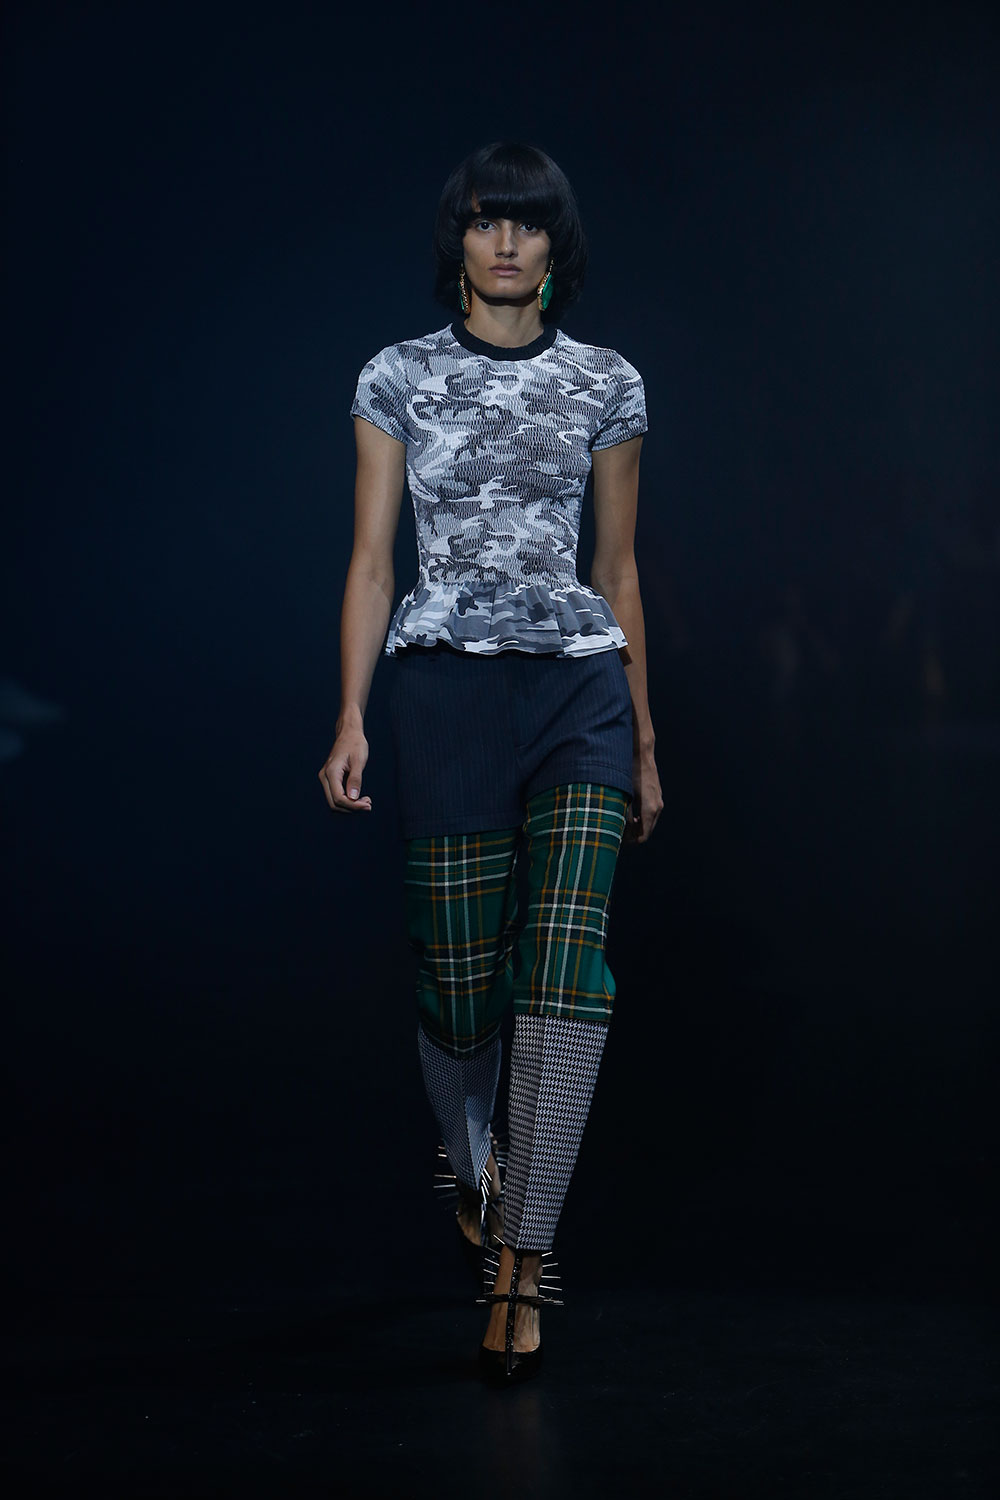 eksplicit websted I udlandet Yes, Balenciaga Wants You to Wear Printed Leggings and Crocs | Who What Wear